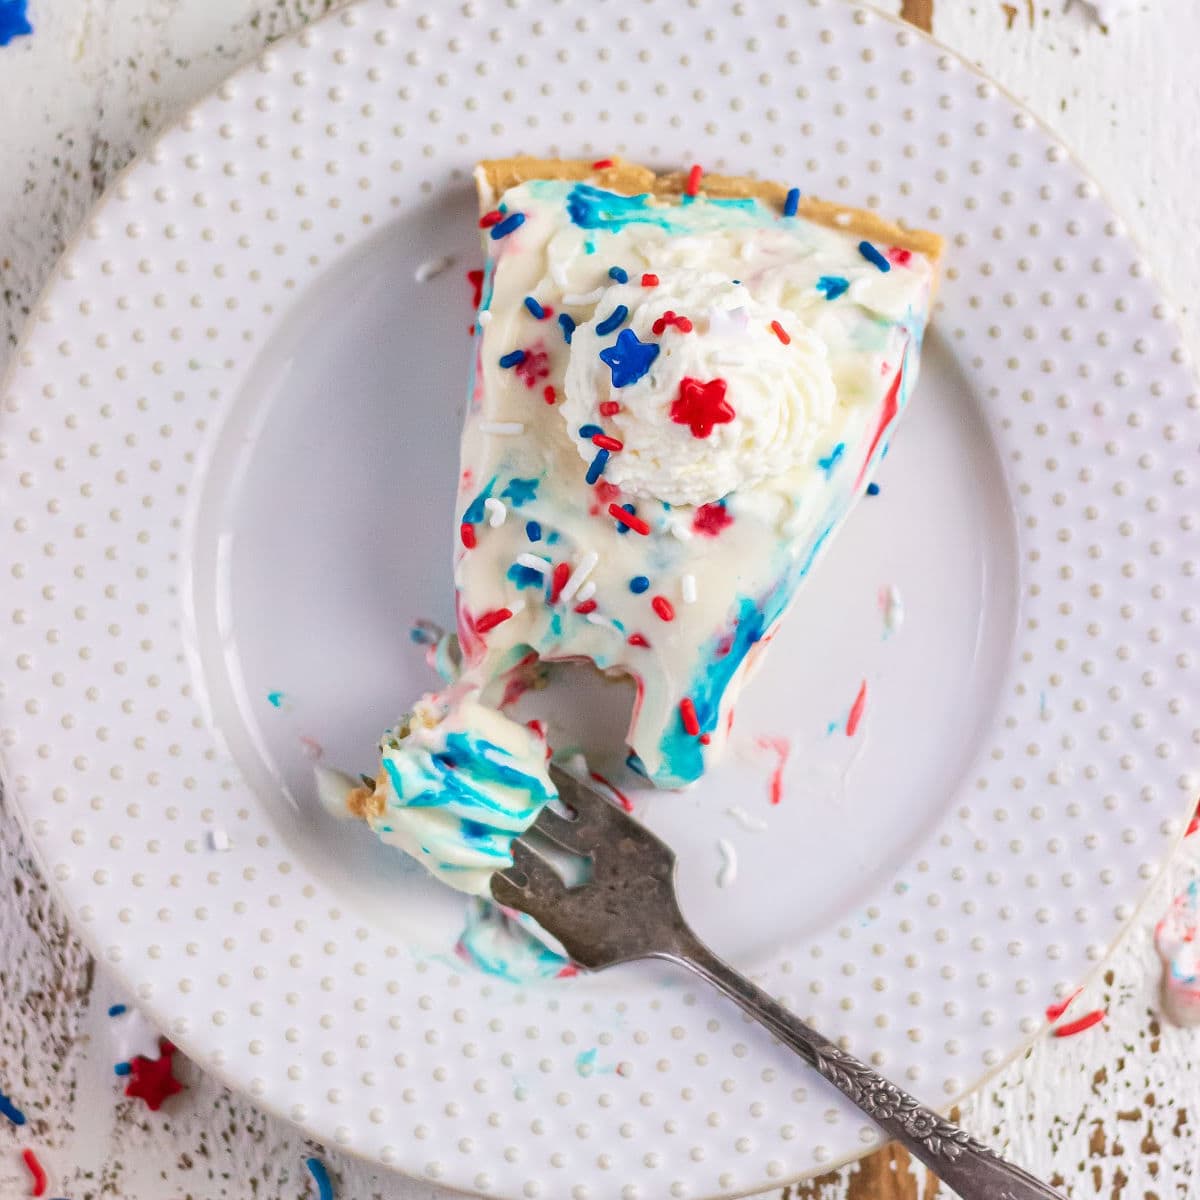 Overhead view of a slice of the finished pie garnished with red, white, and blue sprinkles.